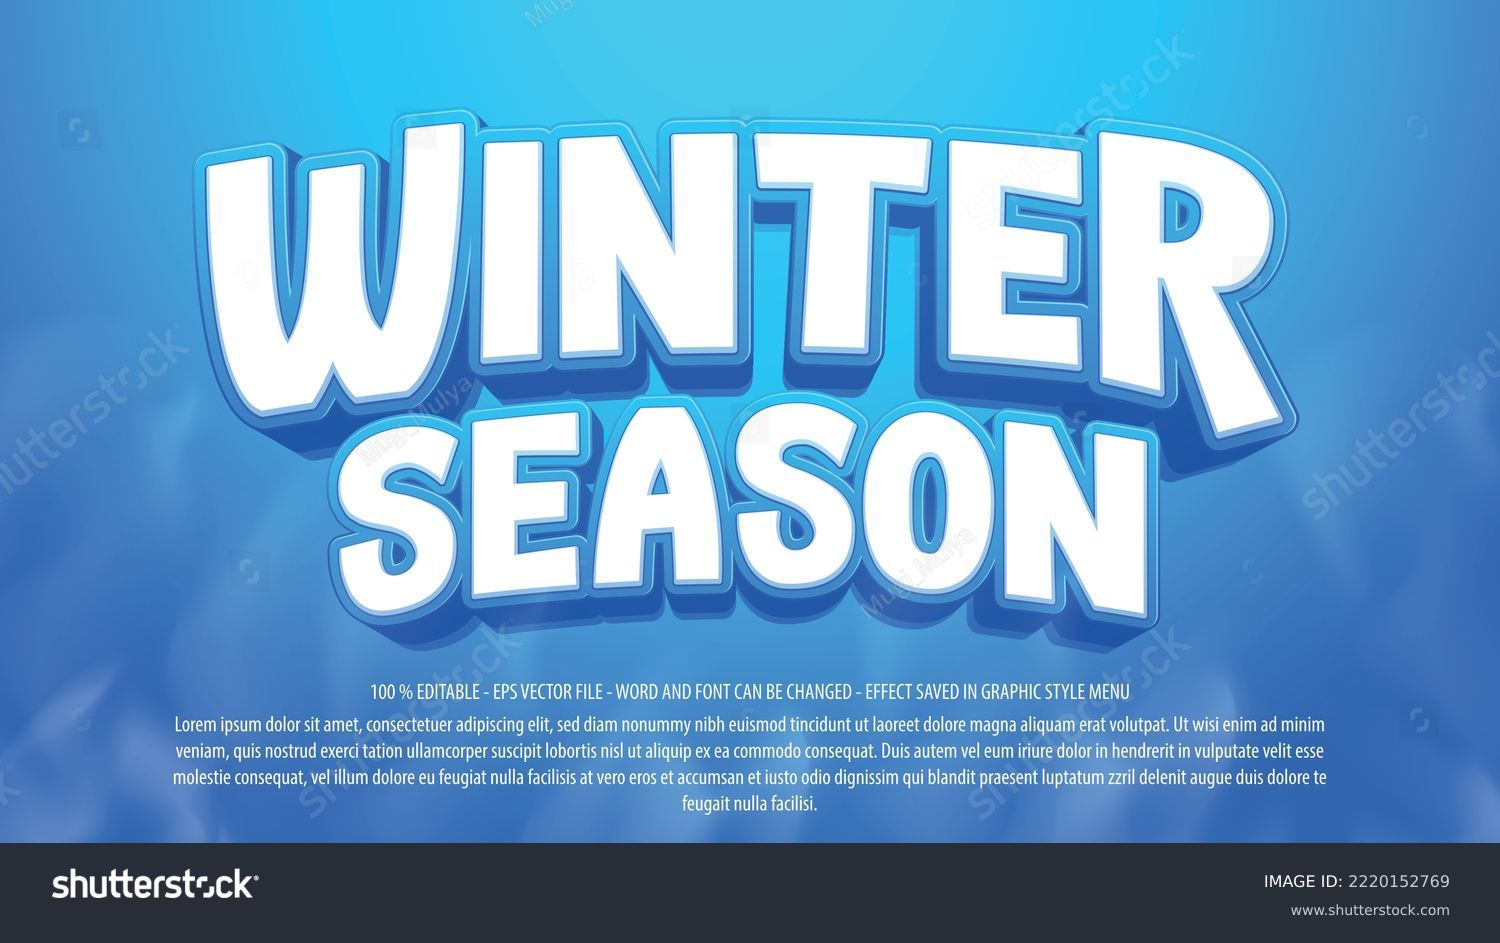 Winter season text effect template with 3d style use for logo and business brand #2220152769